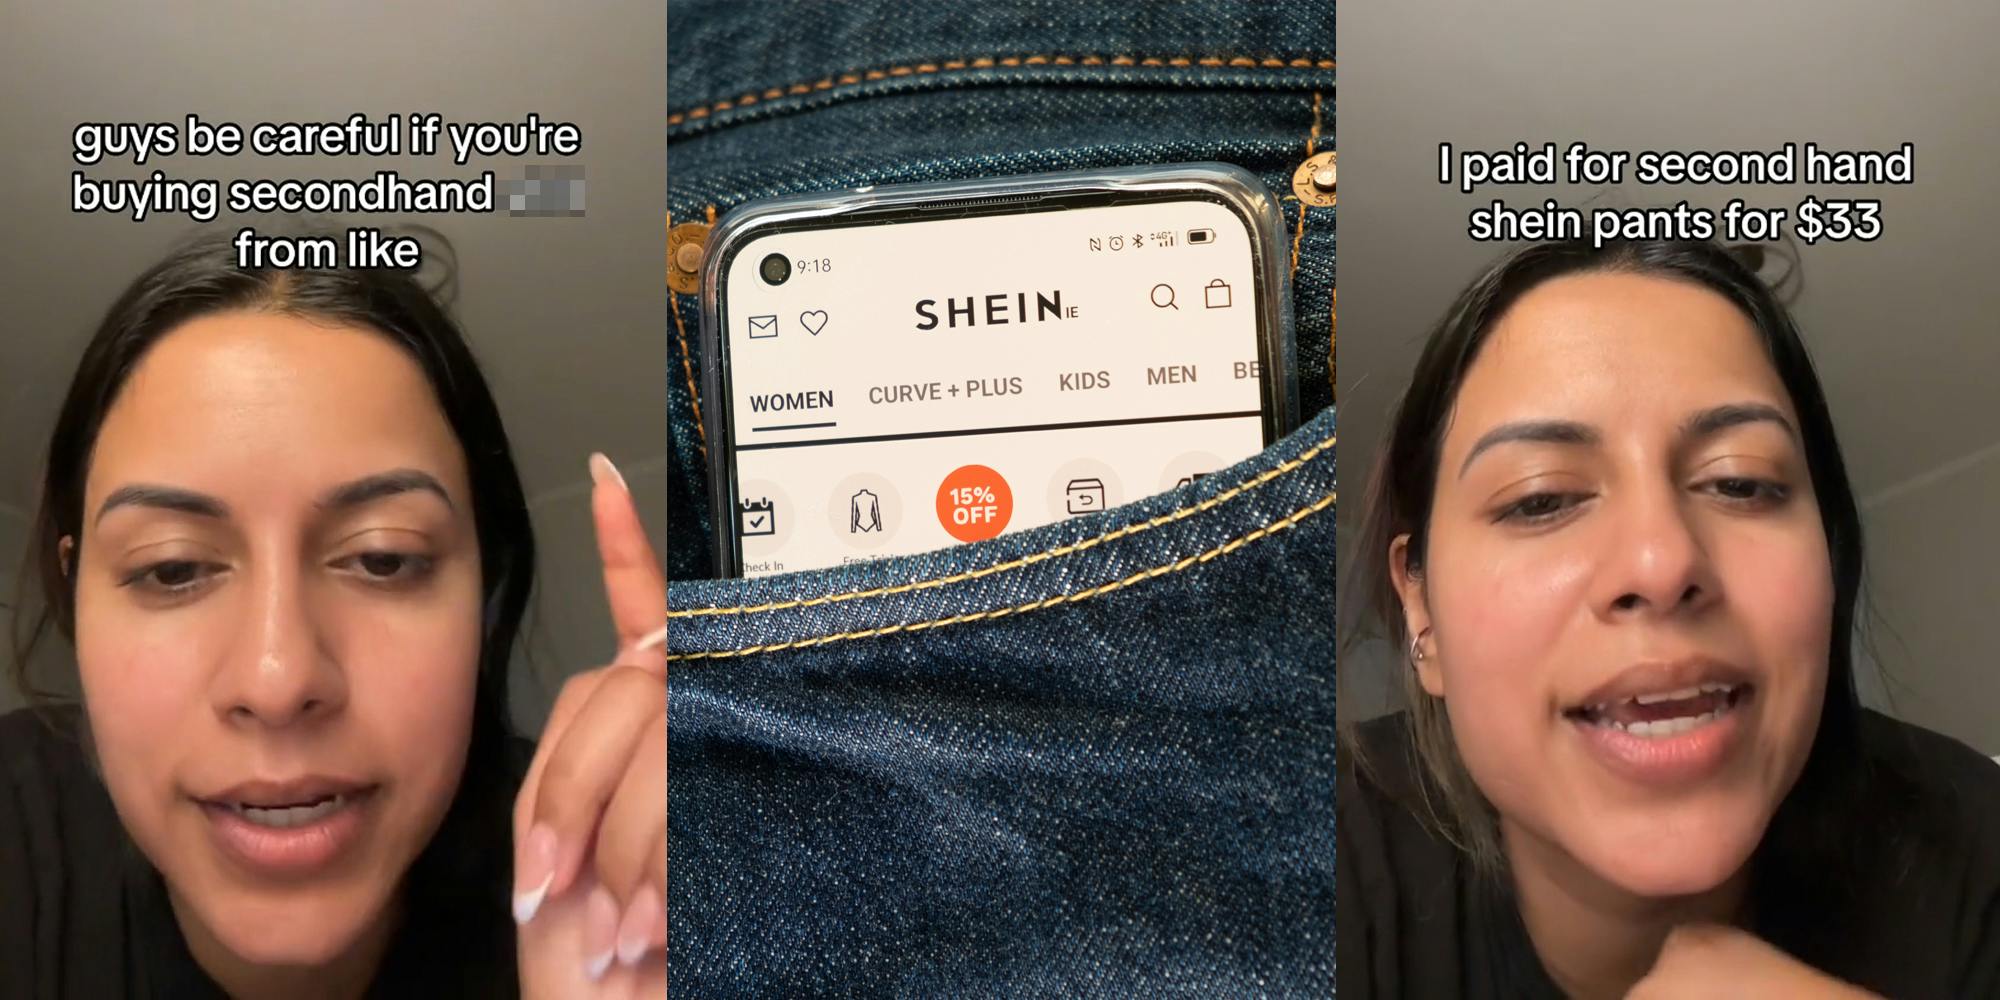 shopper speaking with caption "guys be careful if you're buying secondhand blank from like" (l) Shein app open on phone in jean pocket (c) shopper speaking with caption "I paid for second hand shein pants for $33" (r)